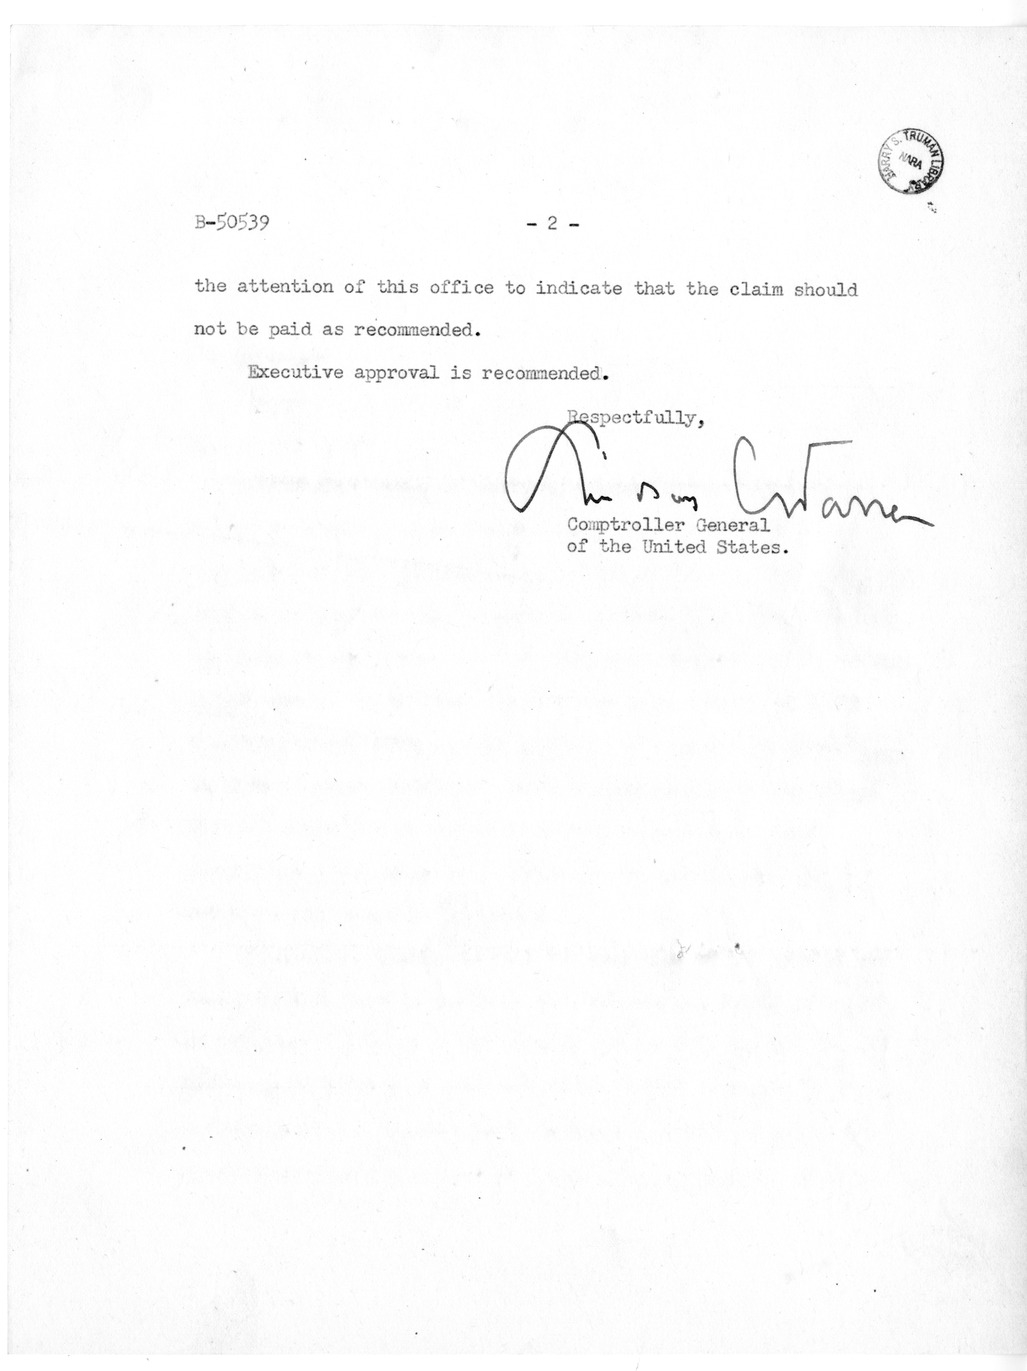 Memorandum from Harold D. Smith to M. C. Latta, S. 1448, For the Relief of William Wilson Wurster, with Attachments